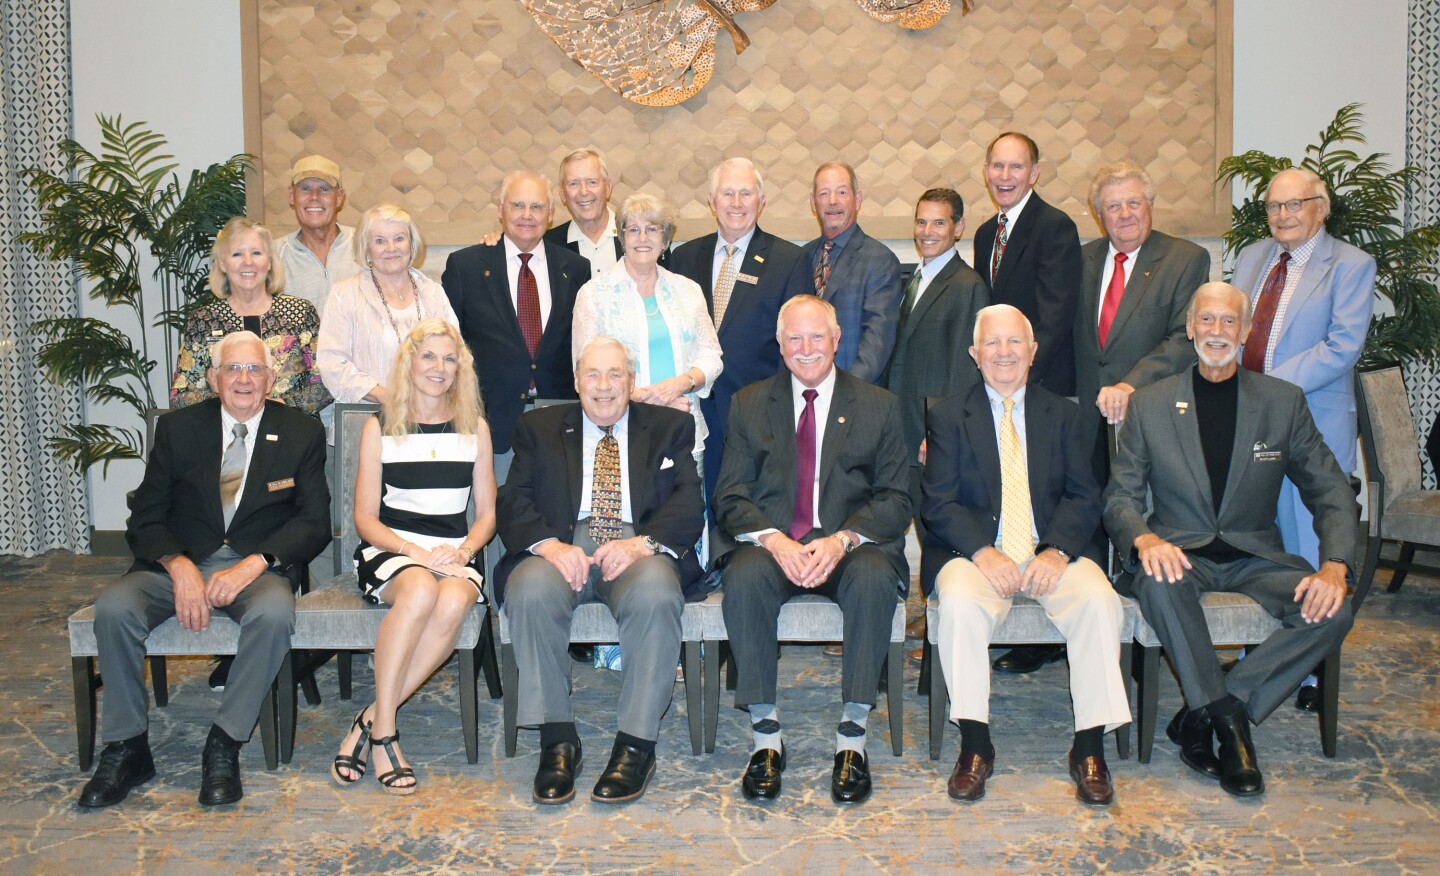 The Rancho Bernardo Hall of Fame members who attended their organization’s celebration on July 16.